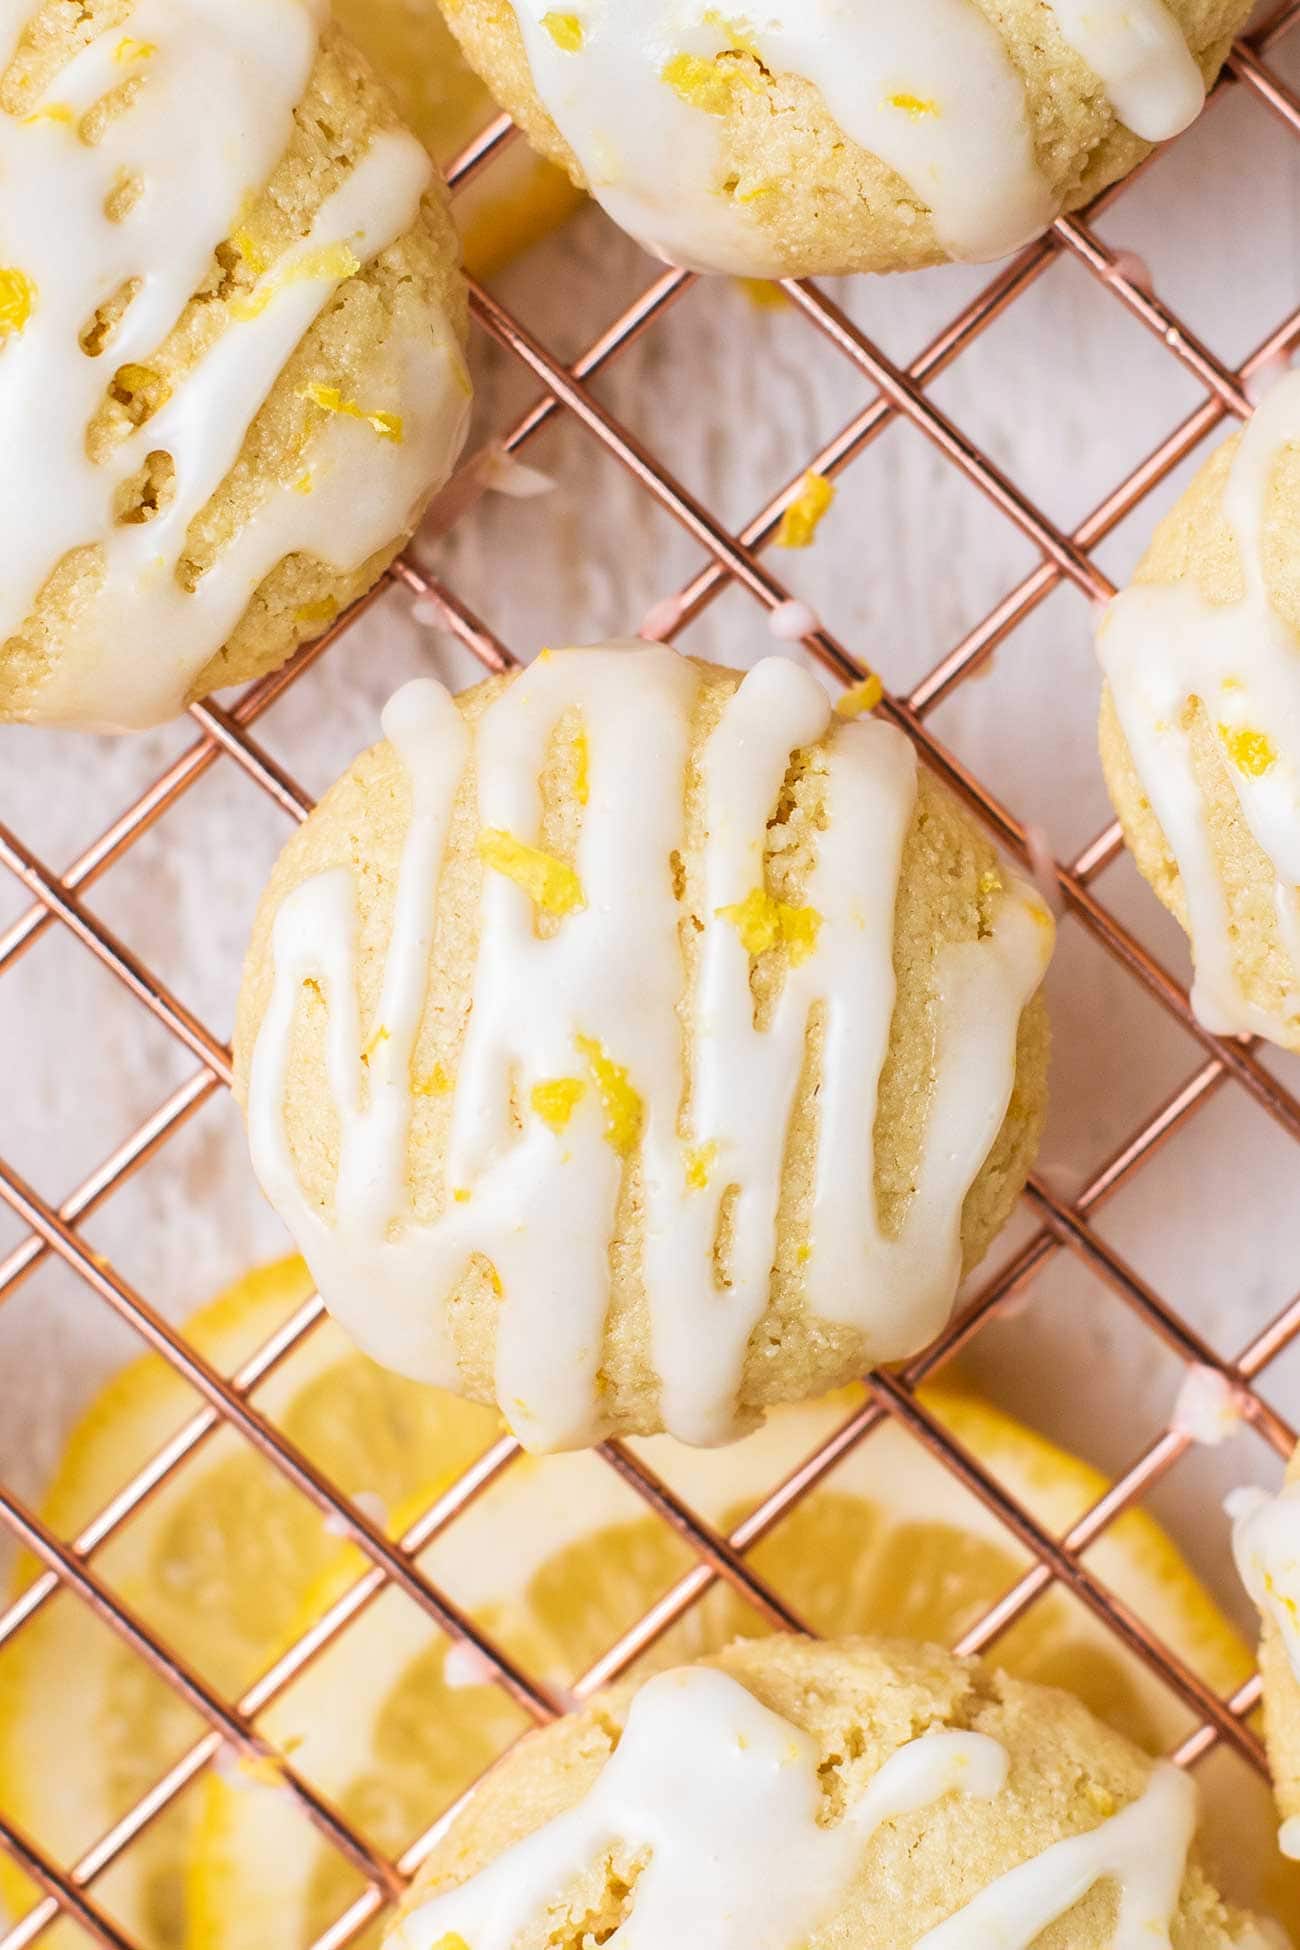 A close up look at a lemon cookie drizzled with a lemon glaze.